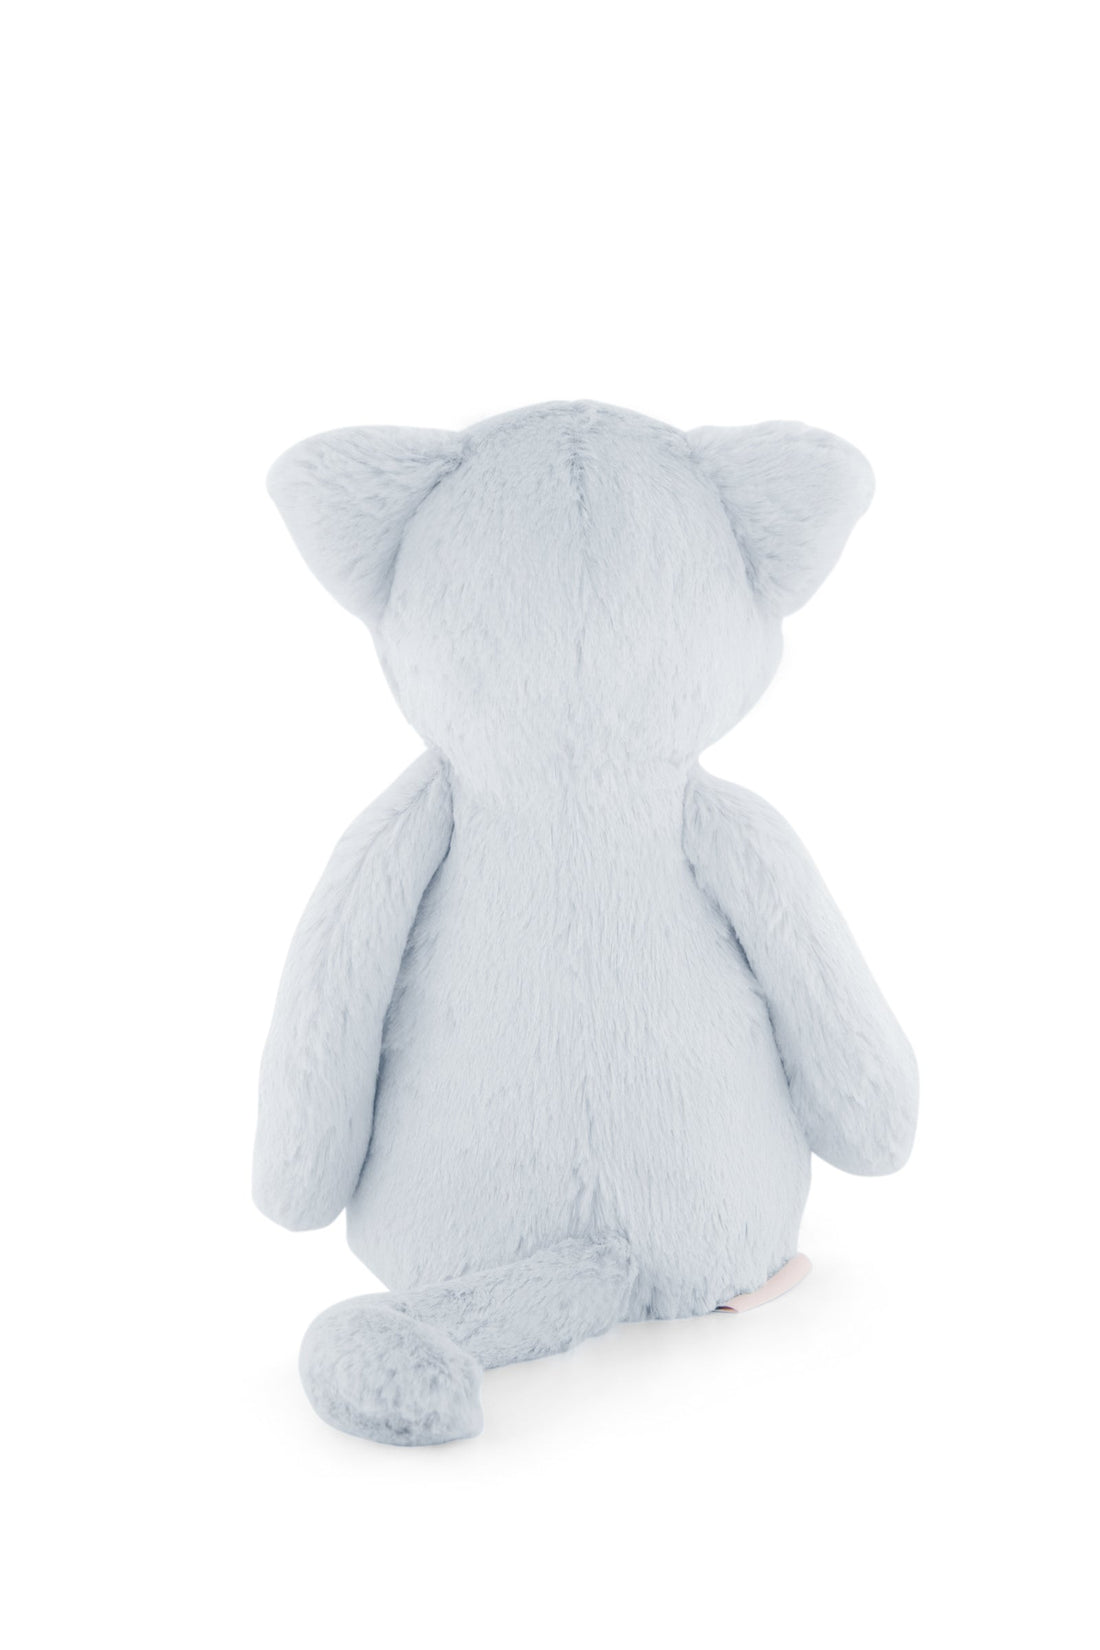 Snuggle Bunnies - Elsie the Kitty - Droplet Childrens Toy from Jamie Kay USA